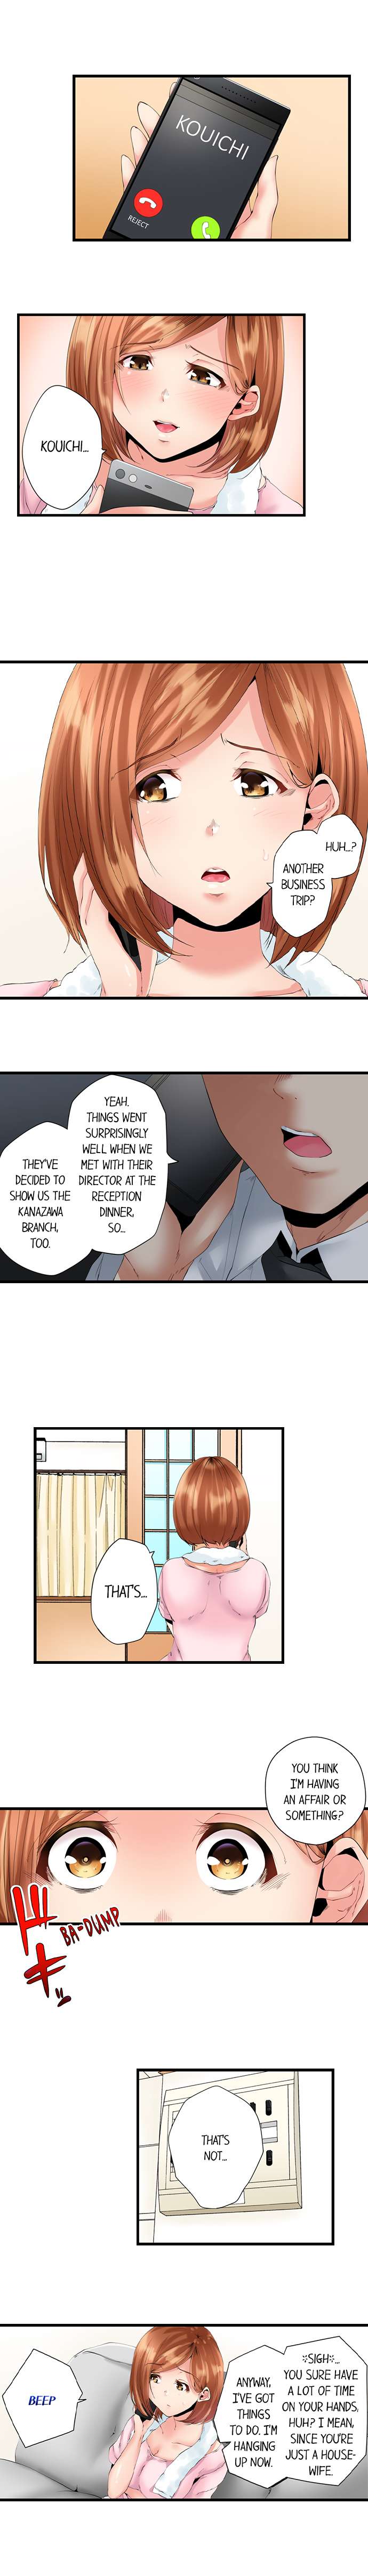 A Rebellious Girl's Sexual Instruction by Her Teacher - Chapter 1 Page 7